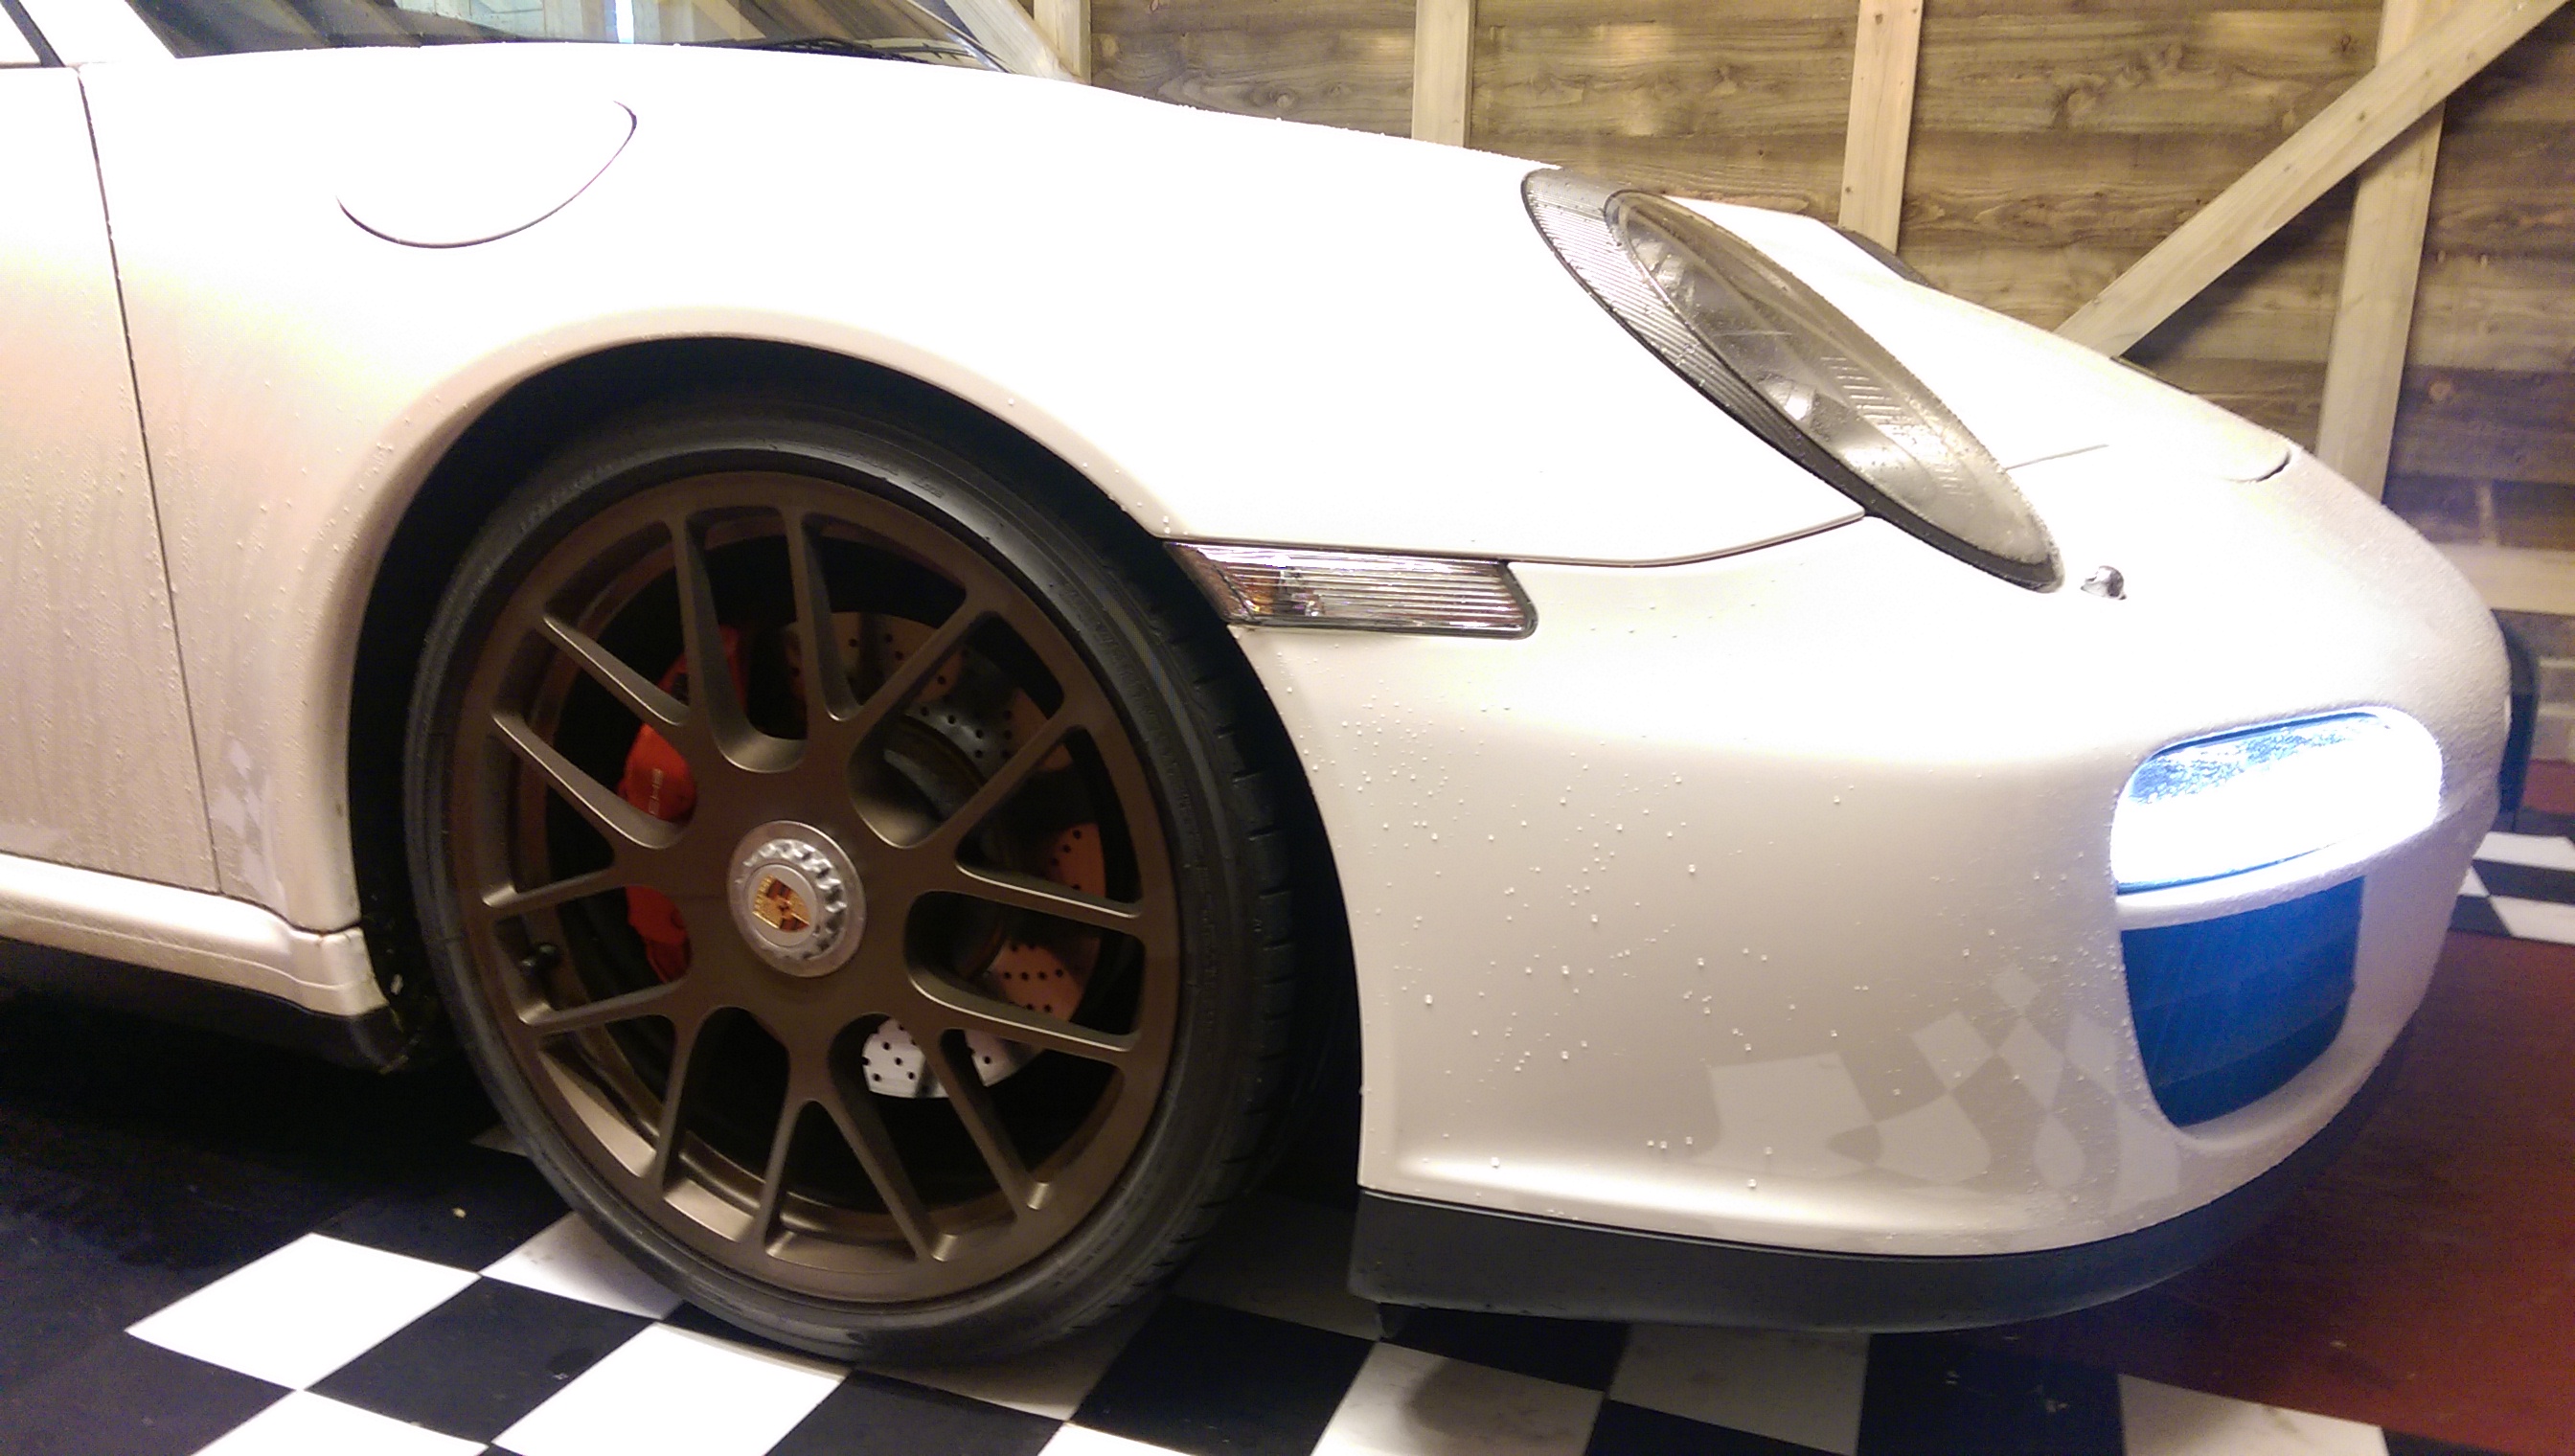 Best wheel colour on 997.2 GTS? VOTE - Page 2 - 911/Carrera GT - PistonHeads